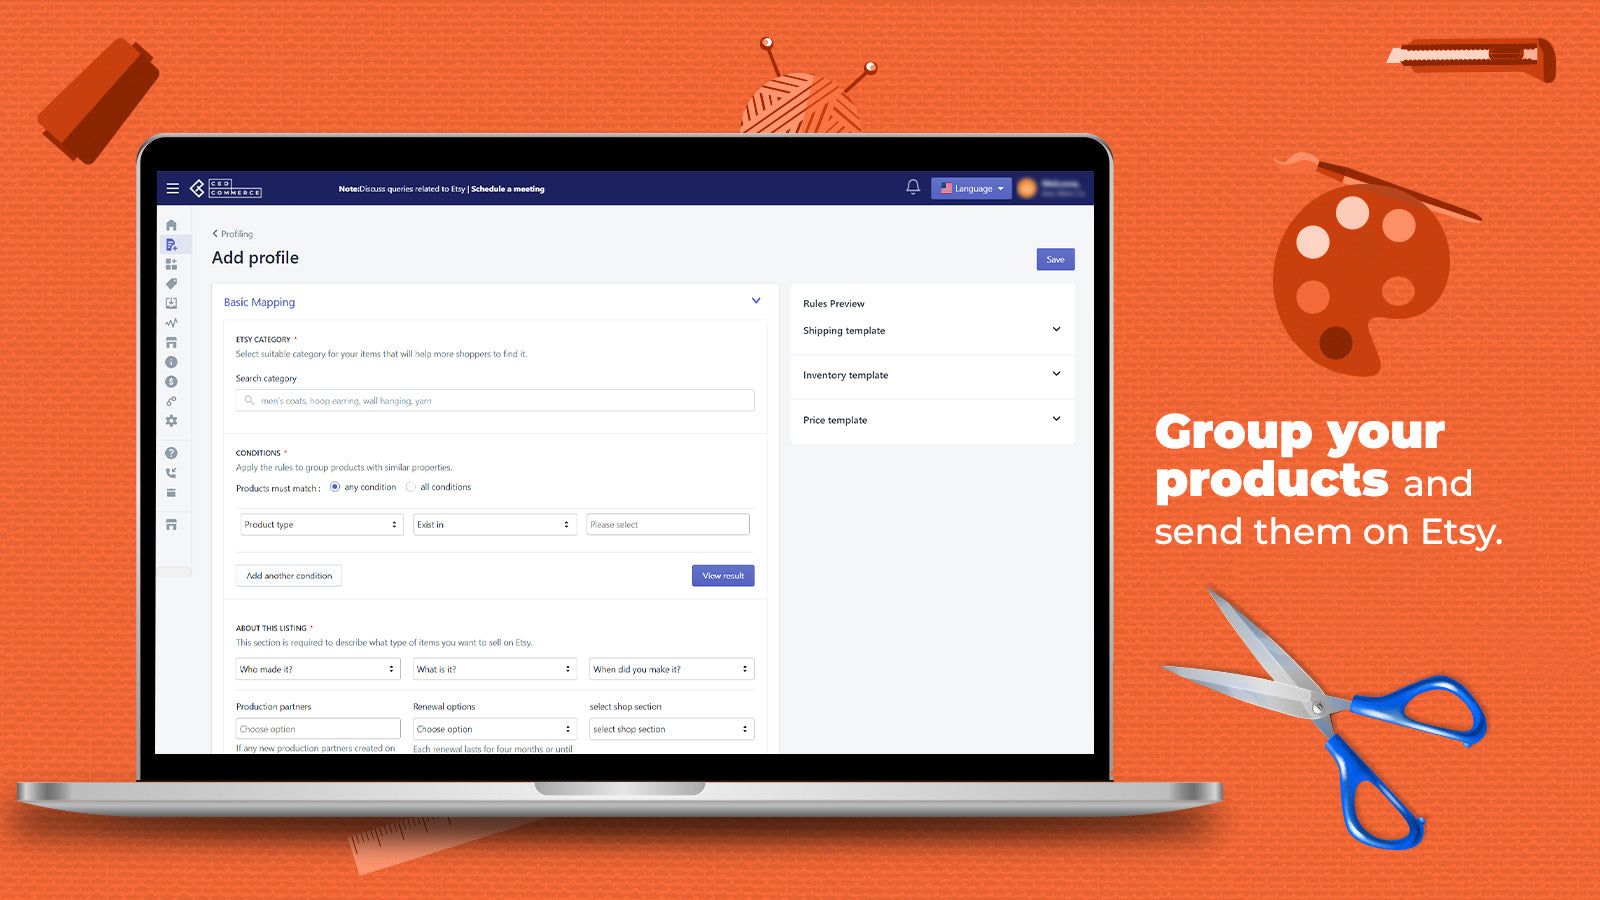 Create profile to group your products